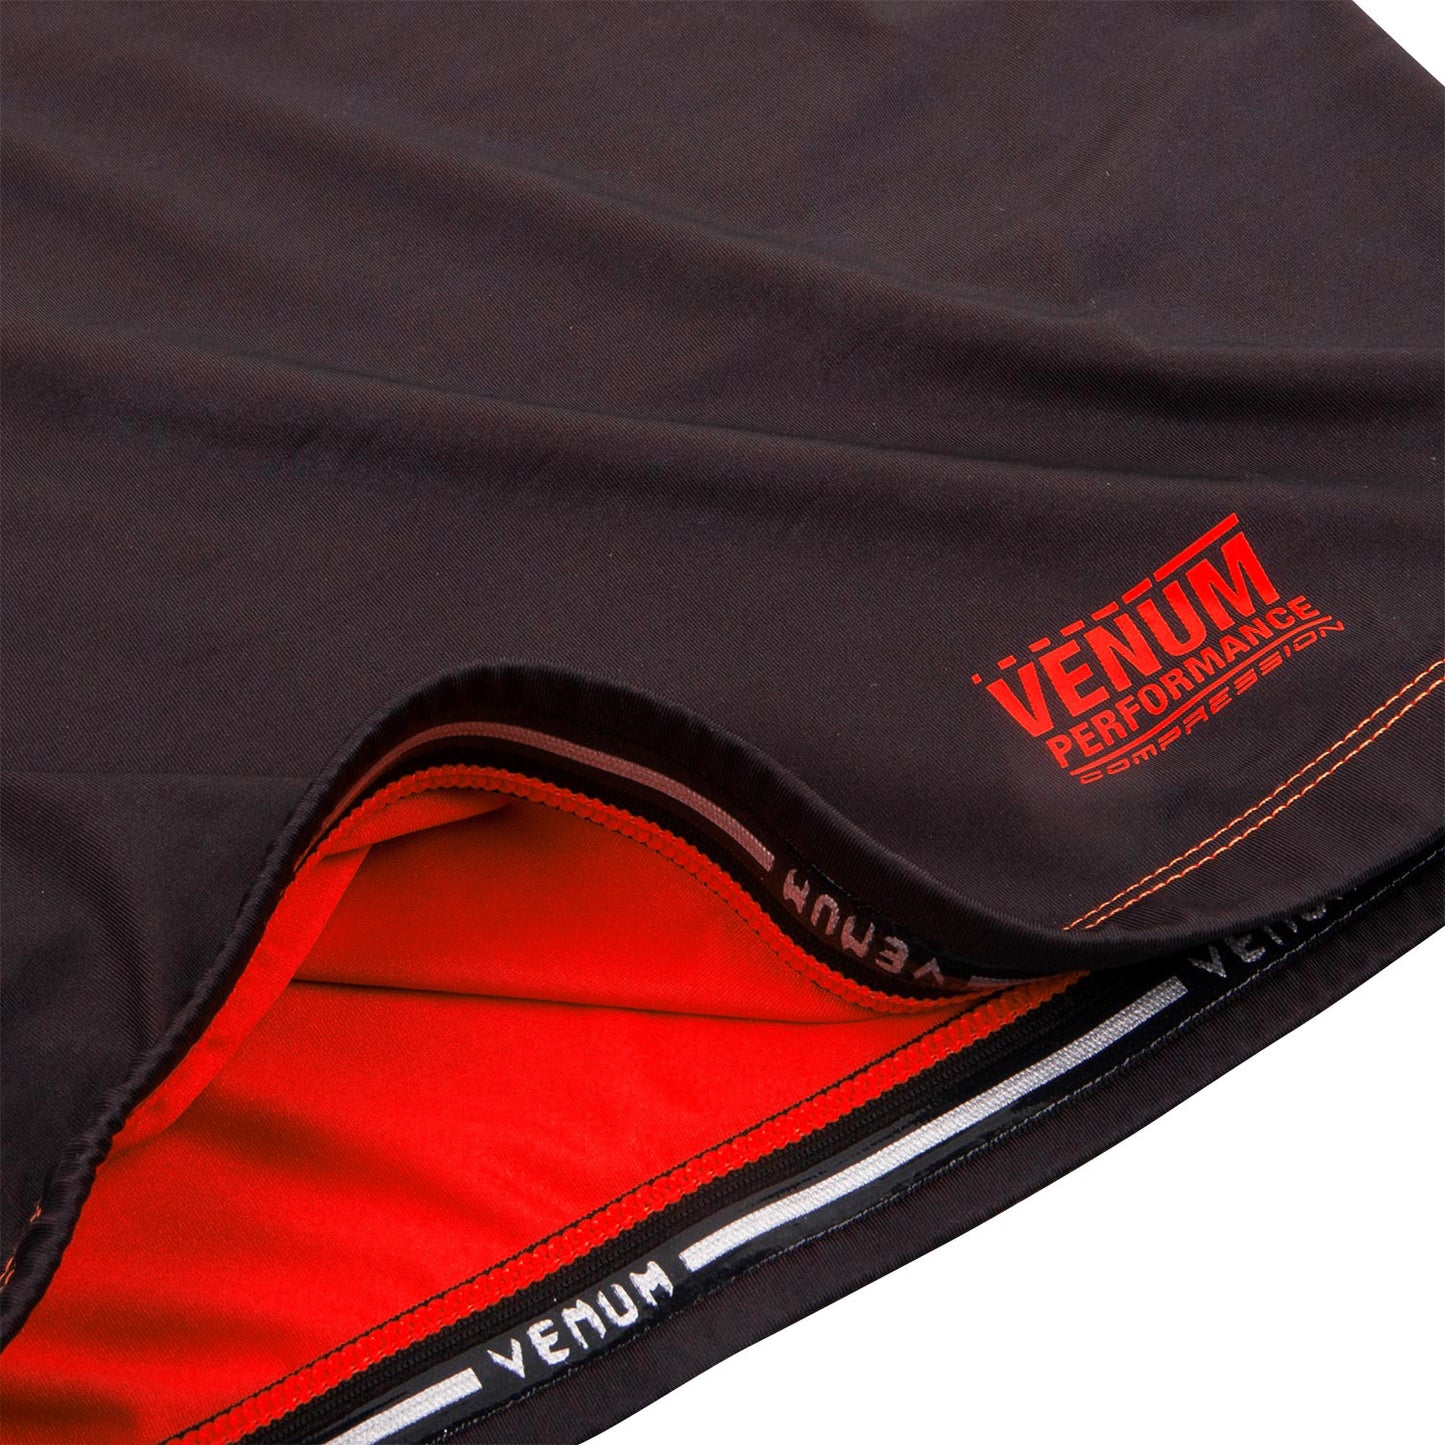 Venum Contender 3.0 Compression T-shirt - Long Sleeves - Black/Red